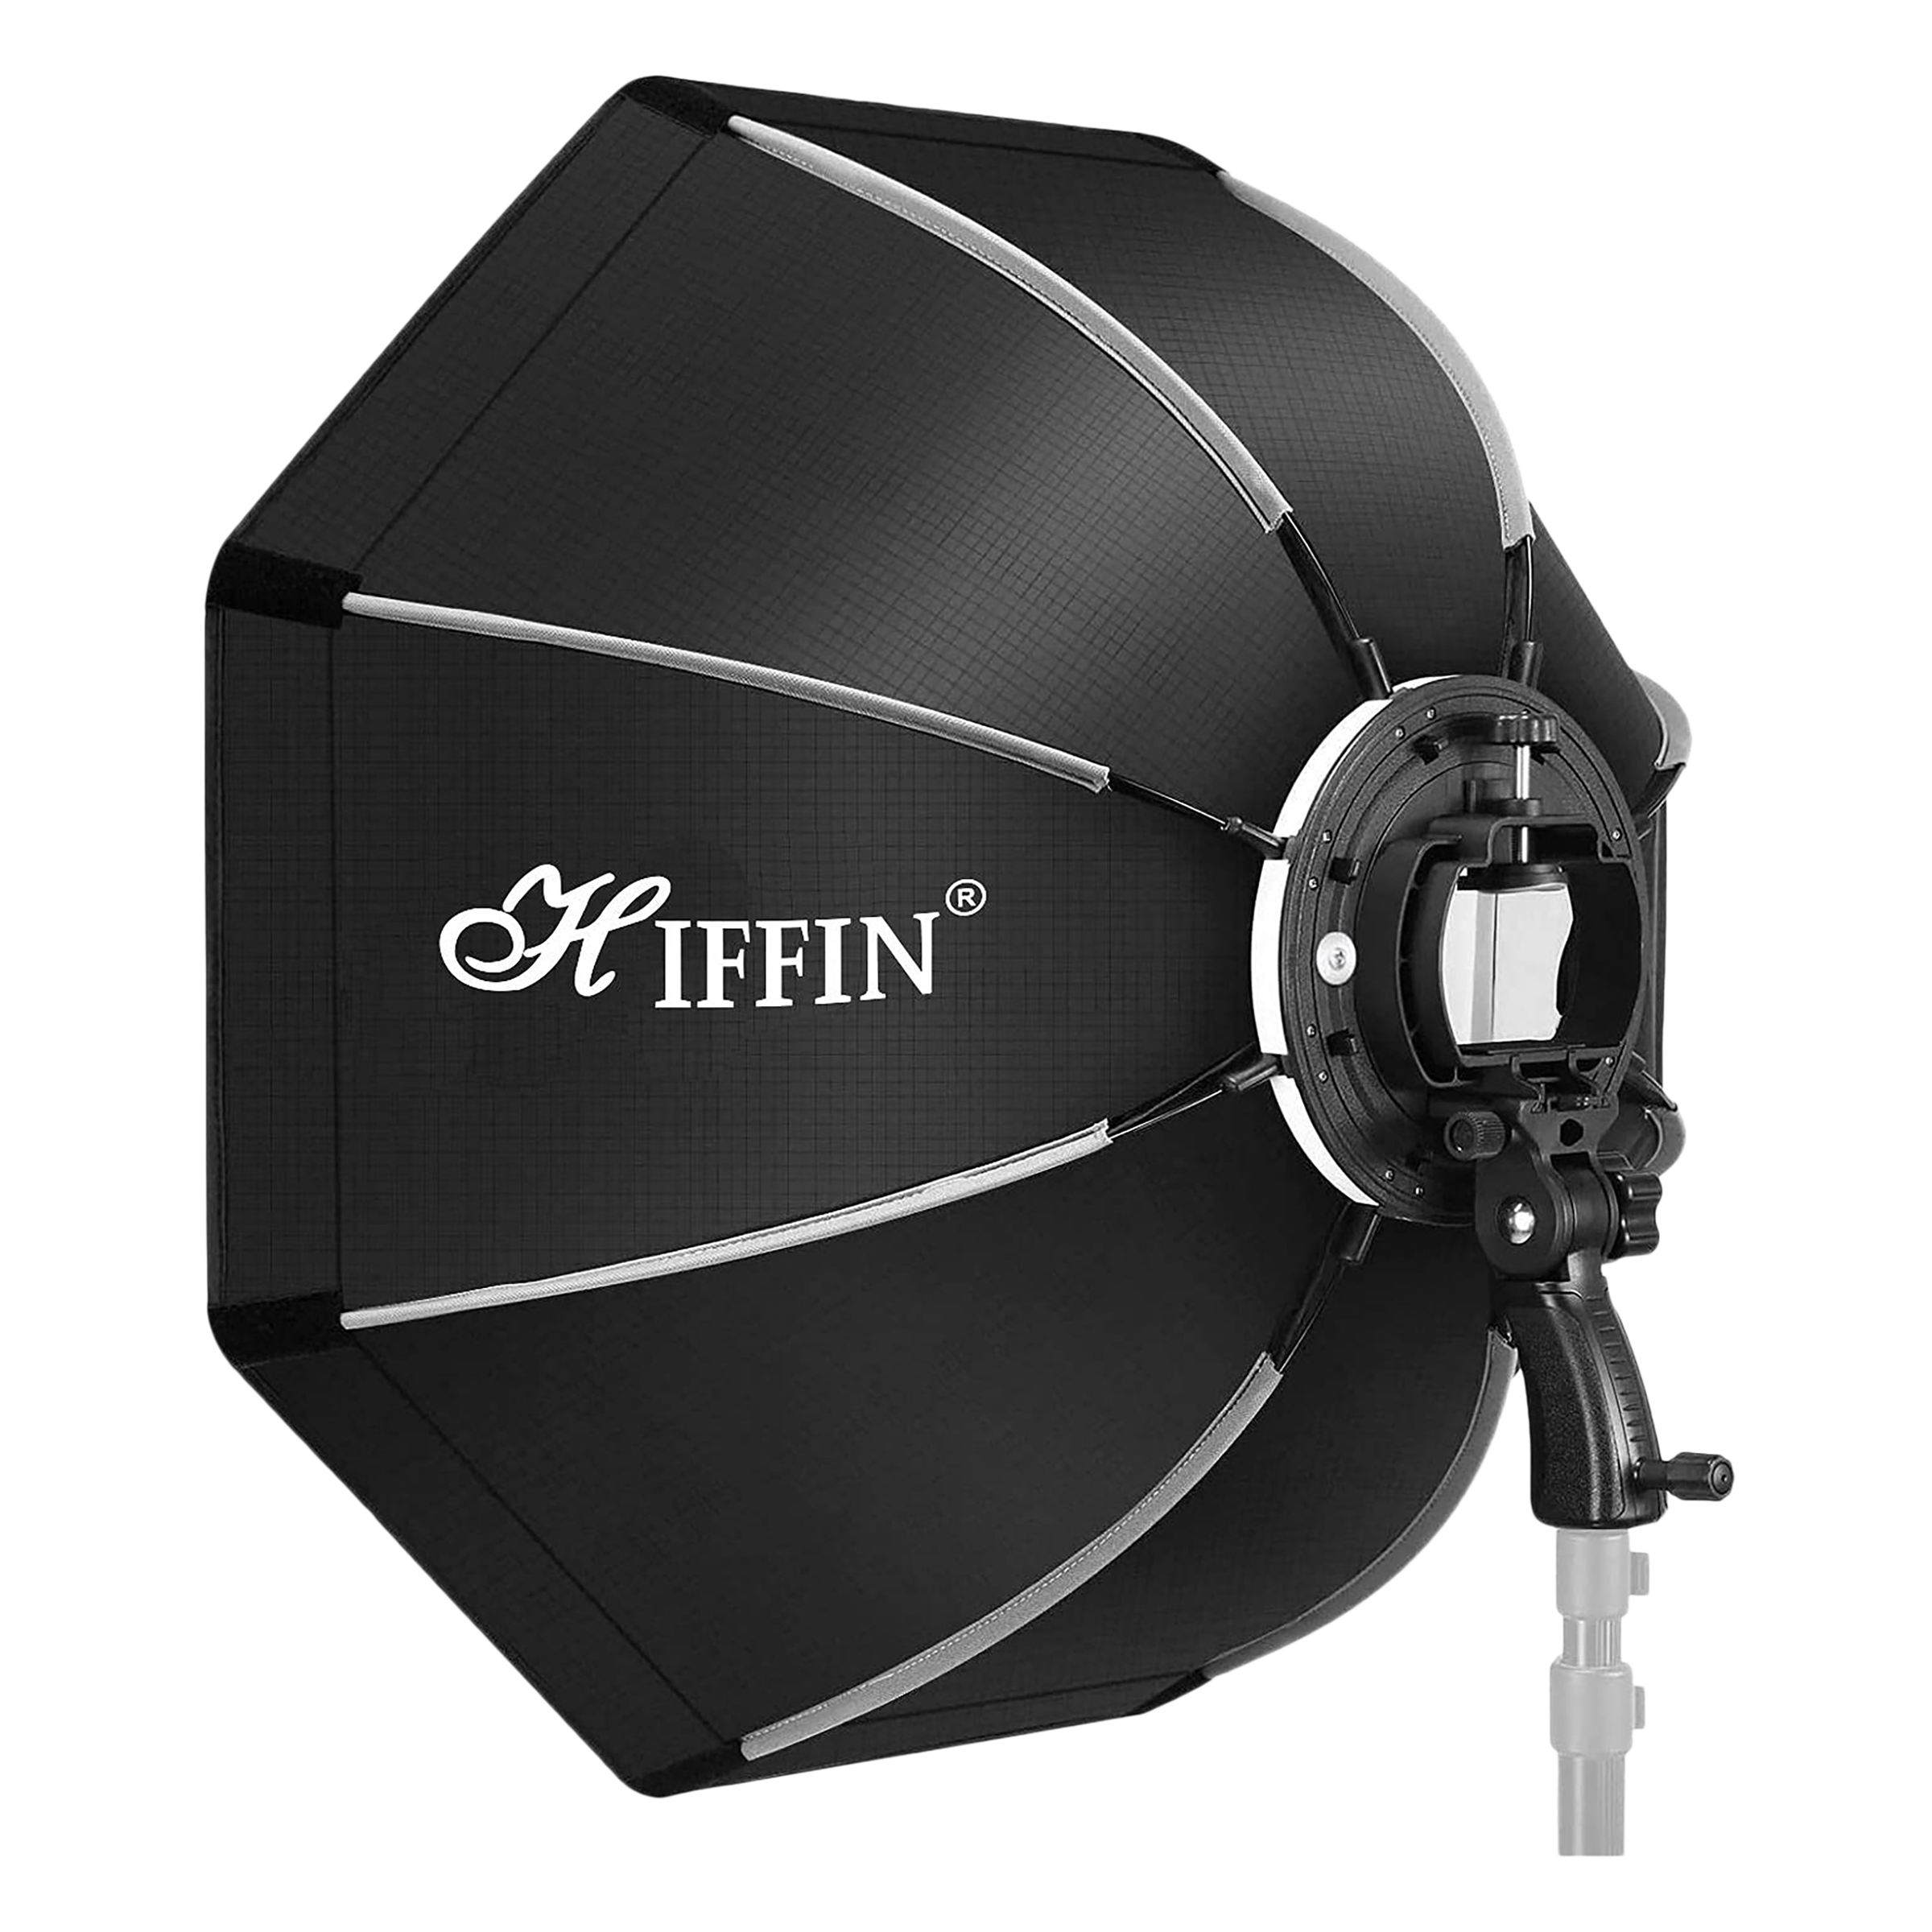 HIFFIN Softbox with 9 Fit Light Stand for All Flash Speedlights (Lightweight & Portable)